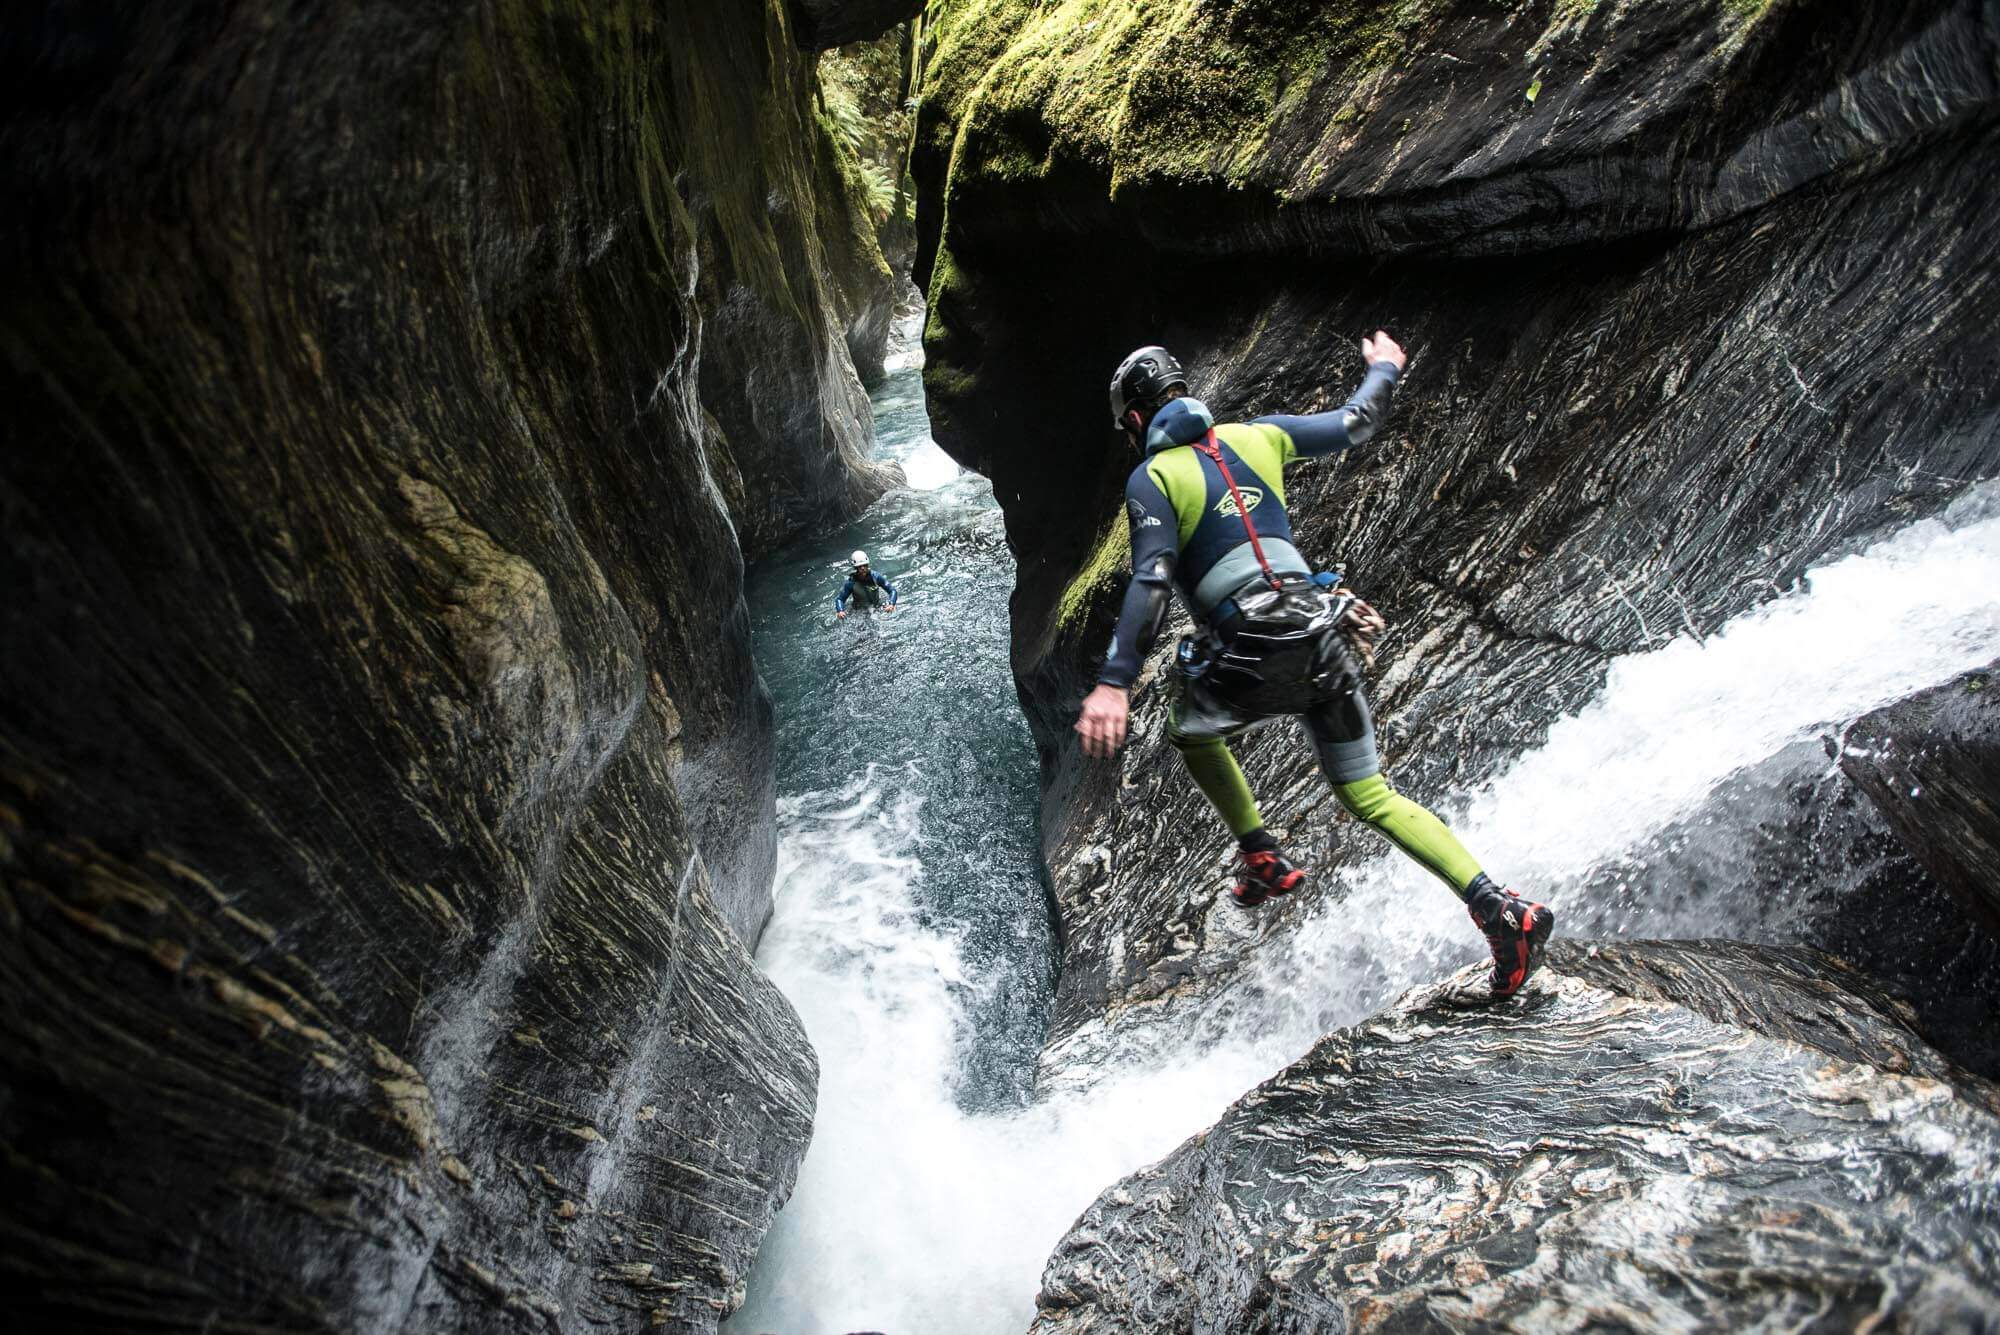 Jumping in the canyon in New Zealand